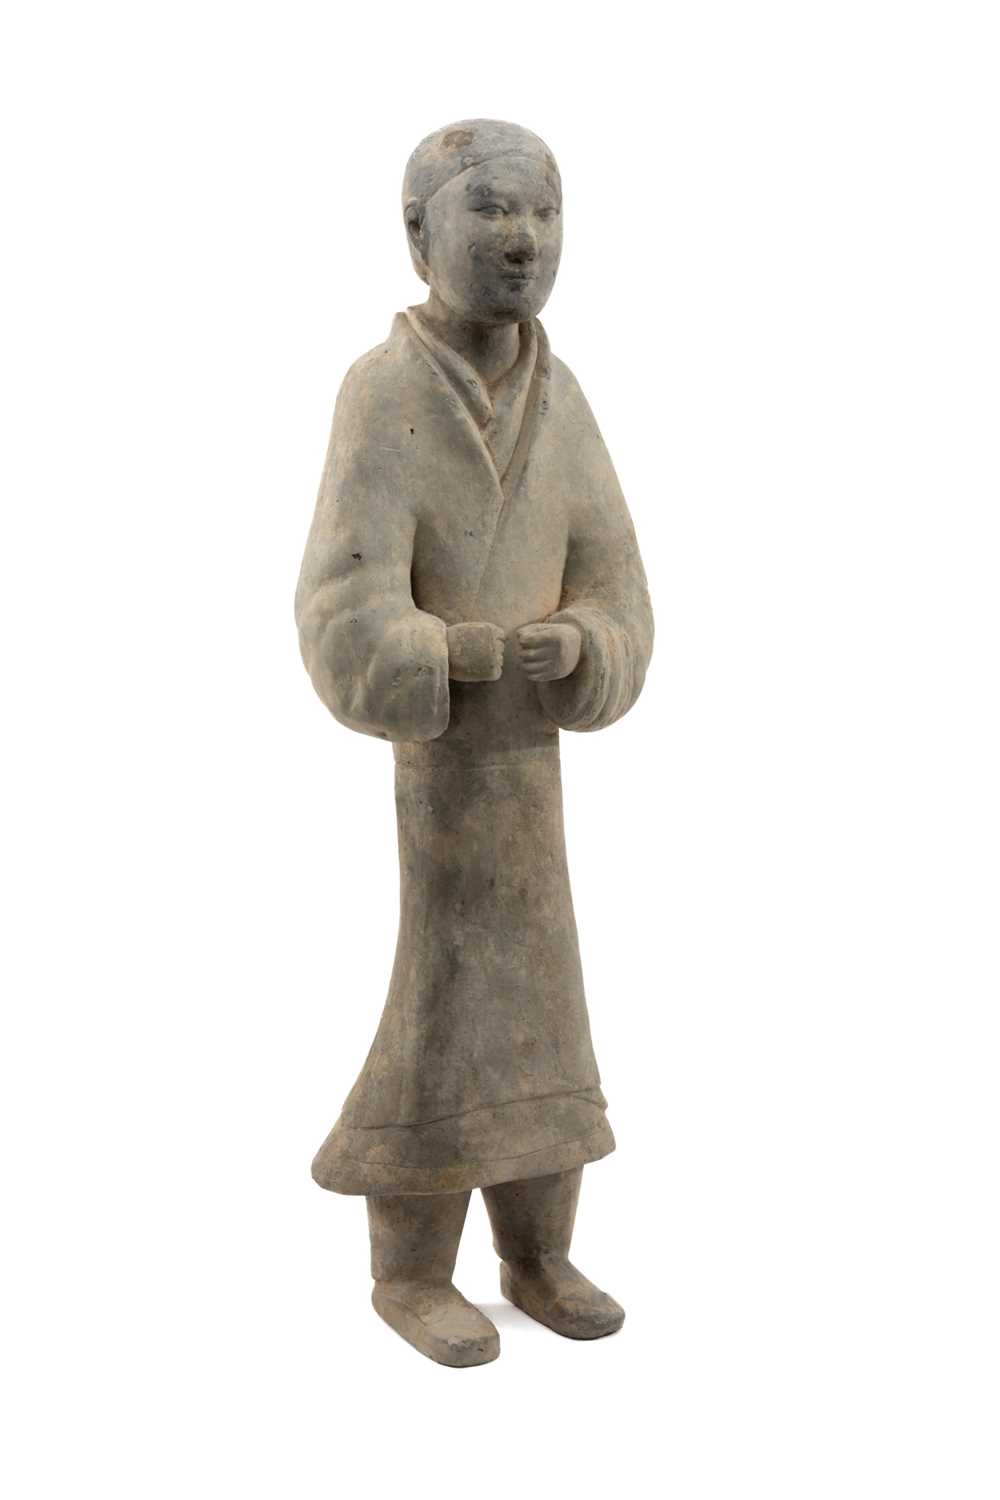 LARGE CHINESE GREY POTTERY FIGURE OF A CIVIL OFFICIAL, Western Han Dynasty (206BC-9AD), standing